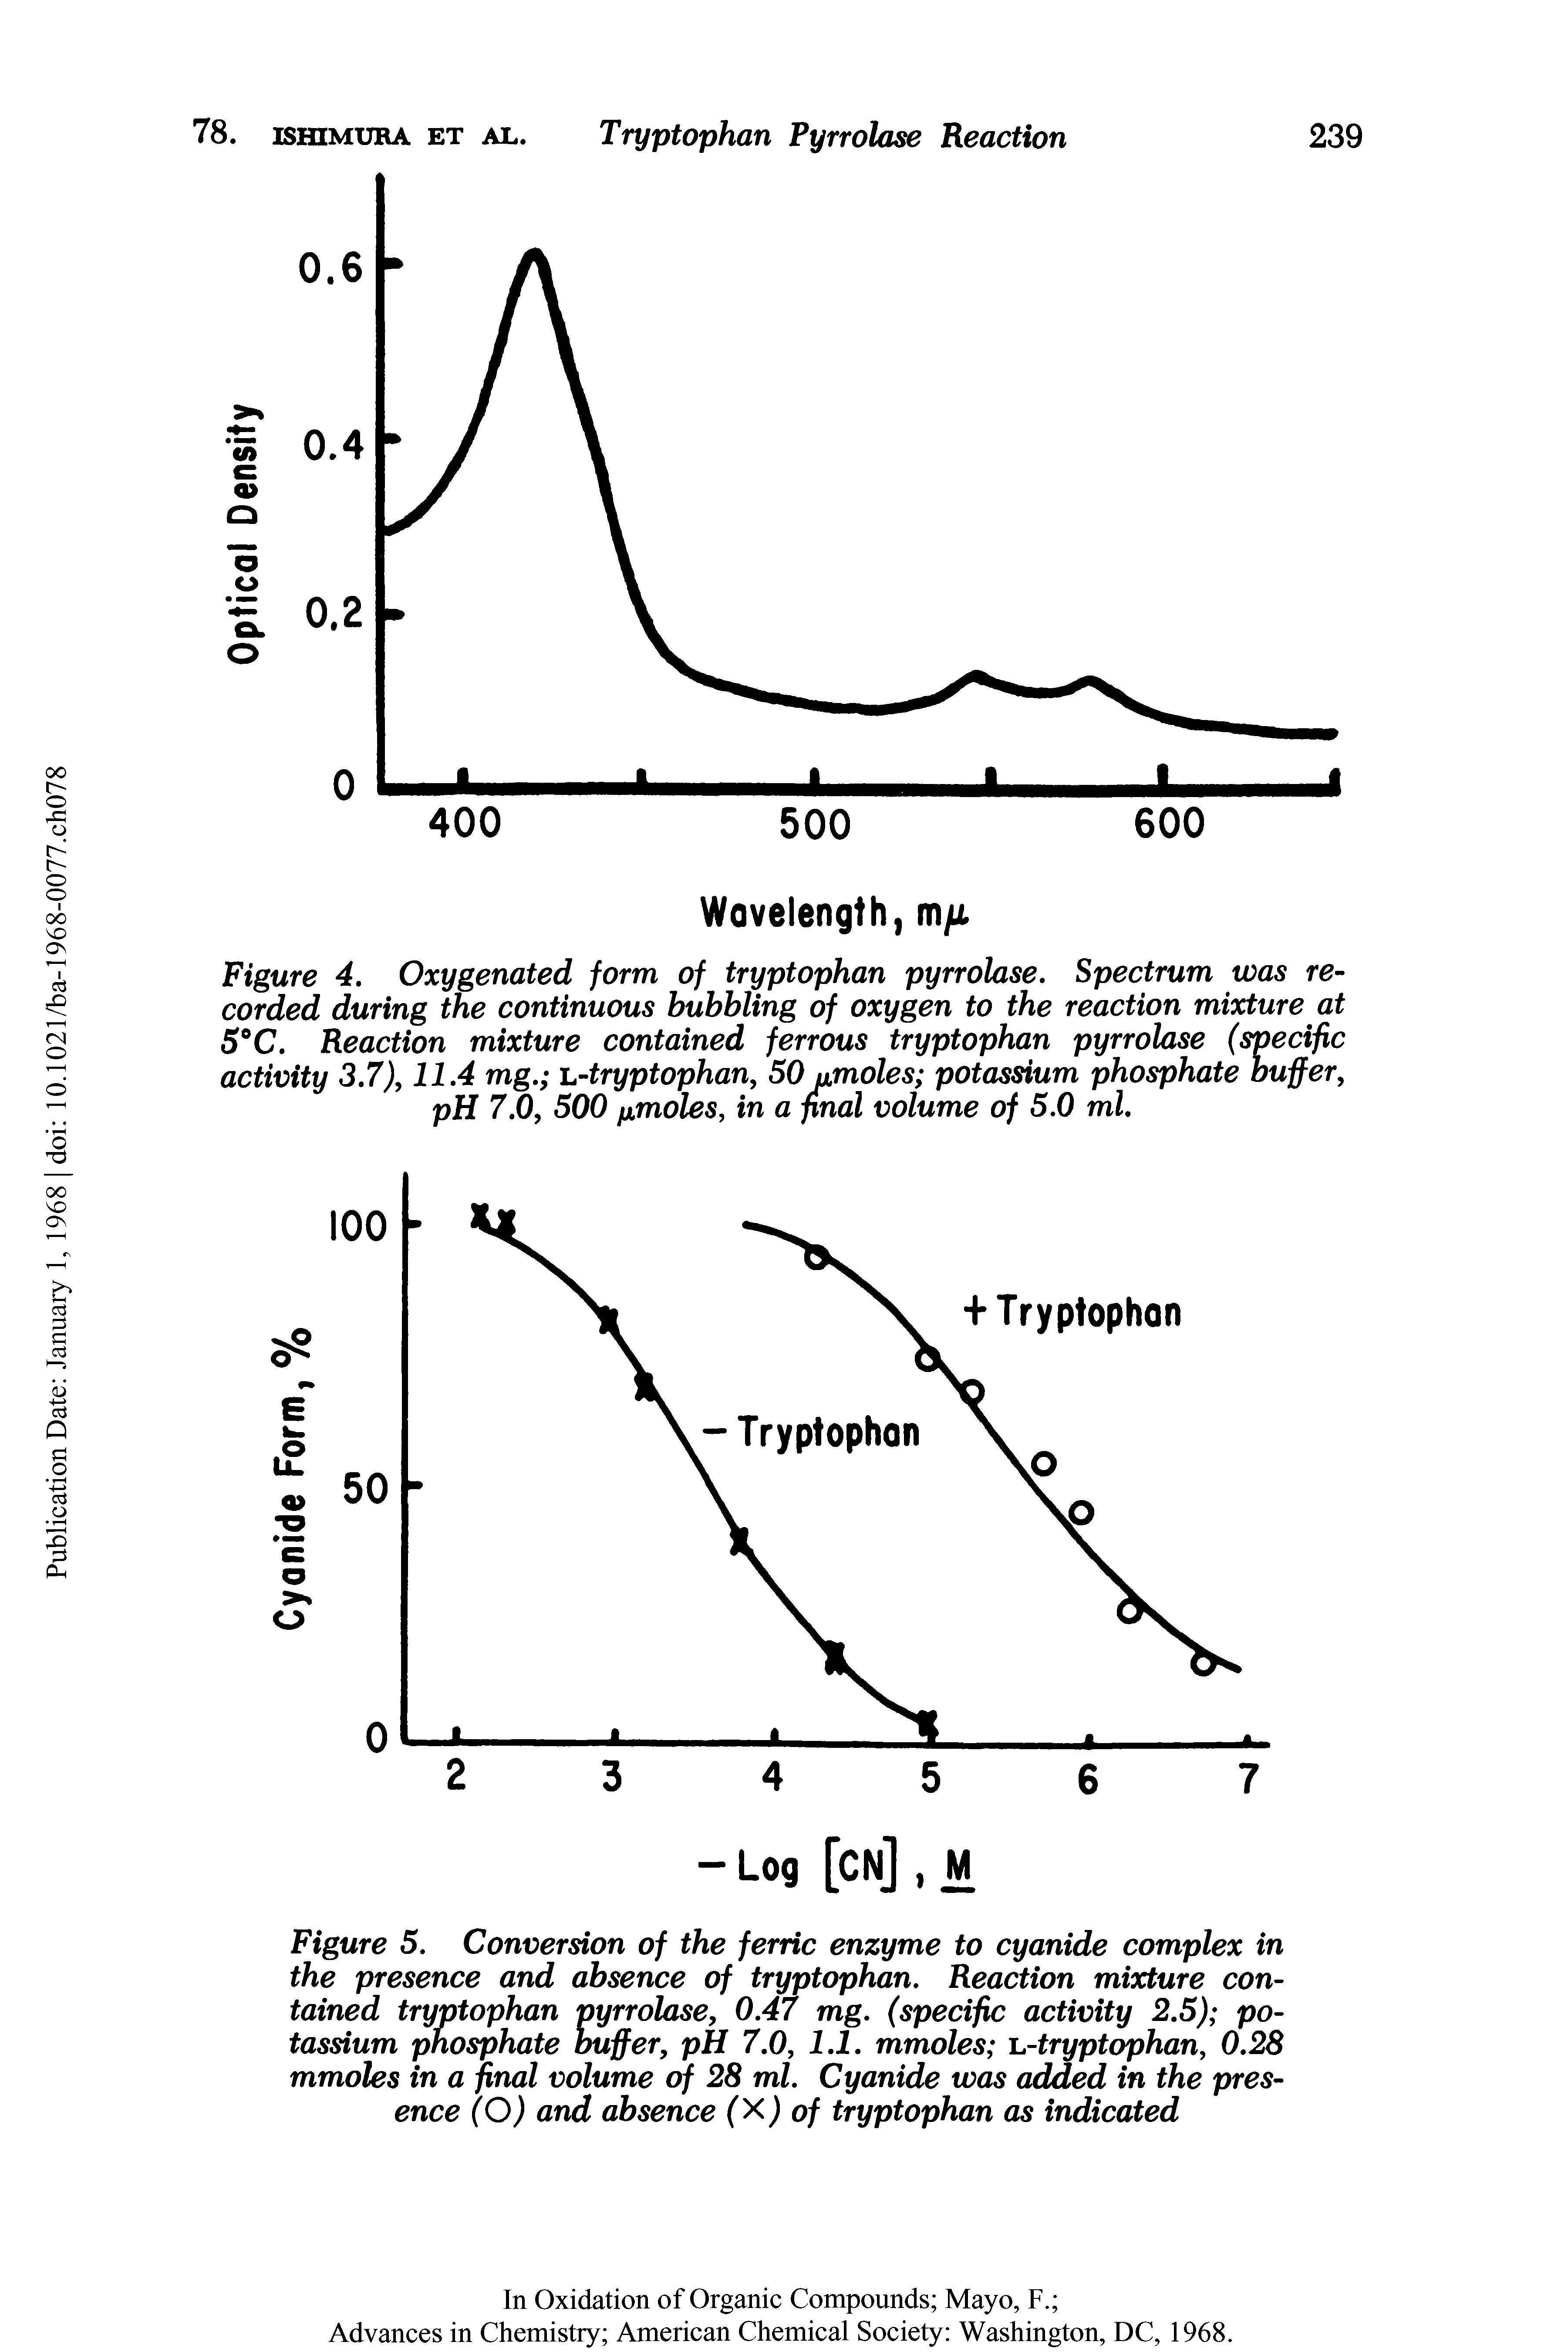 Figure 5. Conversion of the ferric enzyme to cyanide complex in the presence and absence of tryptophan. Reaction mixture contained tryptophan pyrrolase, 0.47 mg. (specific activity 2.5) potassium phosphate buffer, pH 7.0, 1.1. mmoles i.-tryptophan, 0.28 mmoles in a jfinal volume of 28 ml. Cyanide was added in the presence (O) and absence ( X) of tryptophan as indicated...